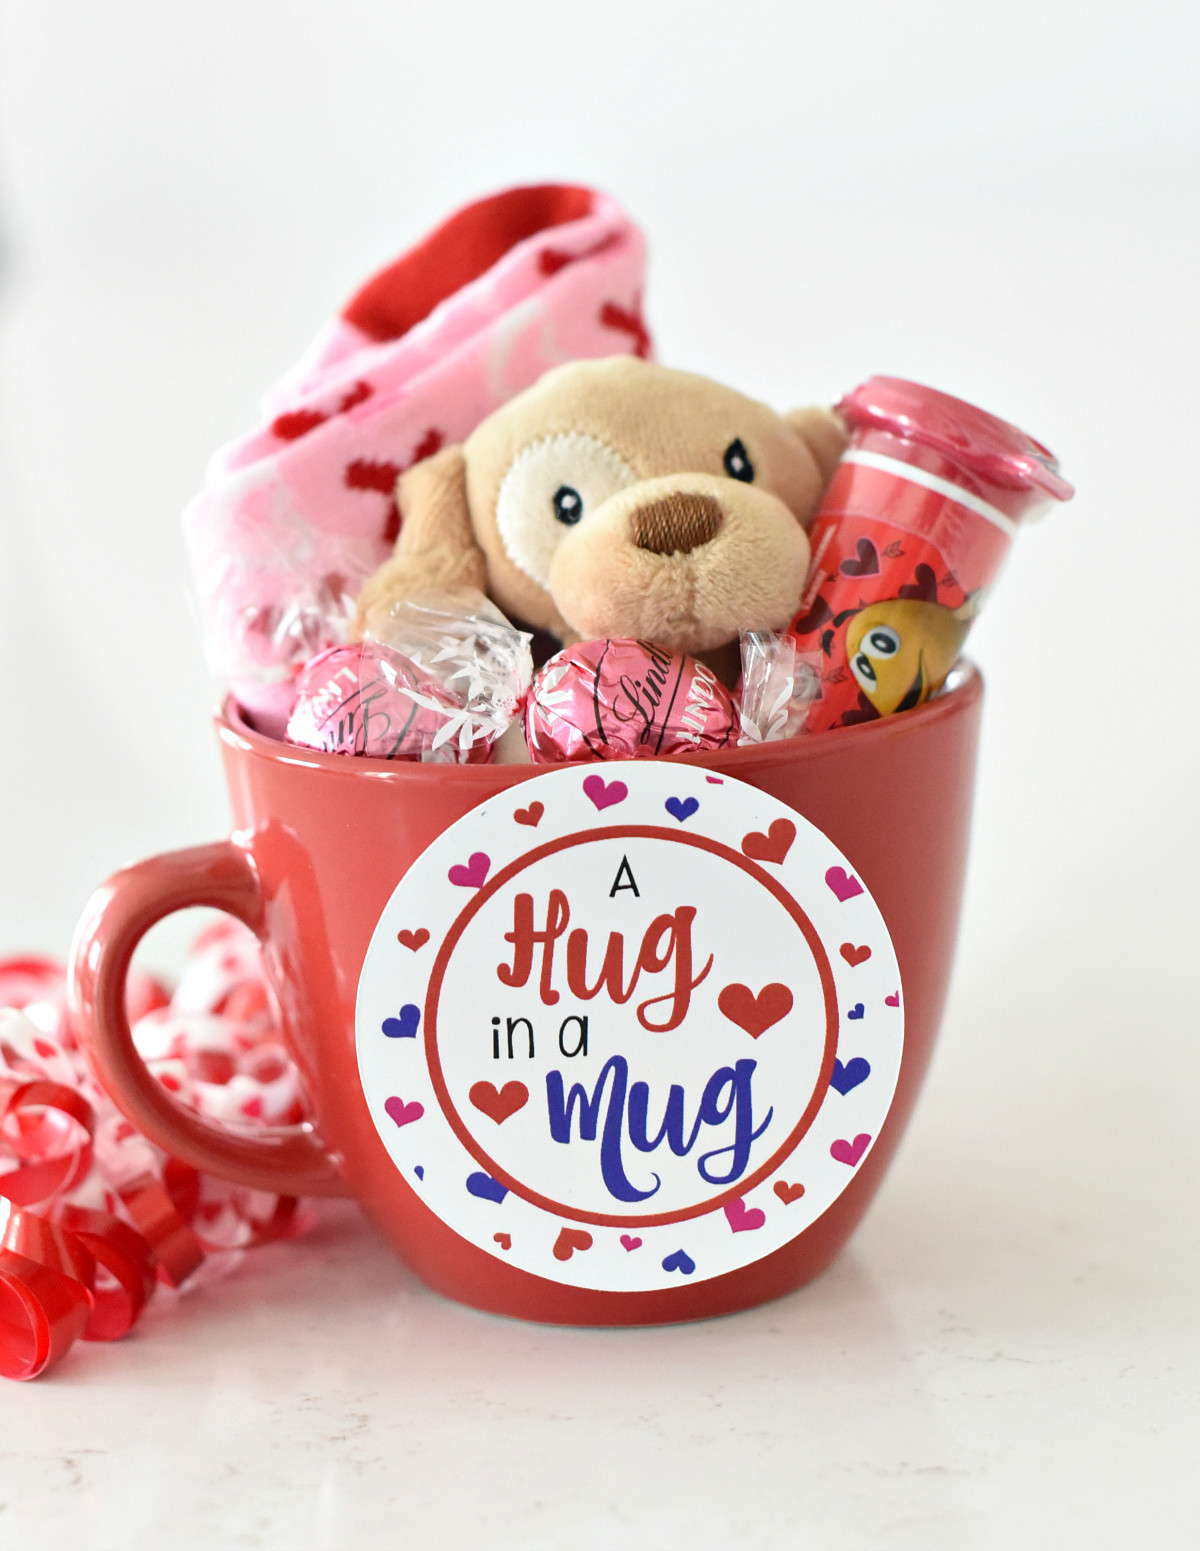 Child Valentine Gift Ideas Awesome Fun Valentines Gift Idea for Kids – Fun Squared